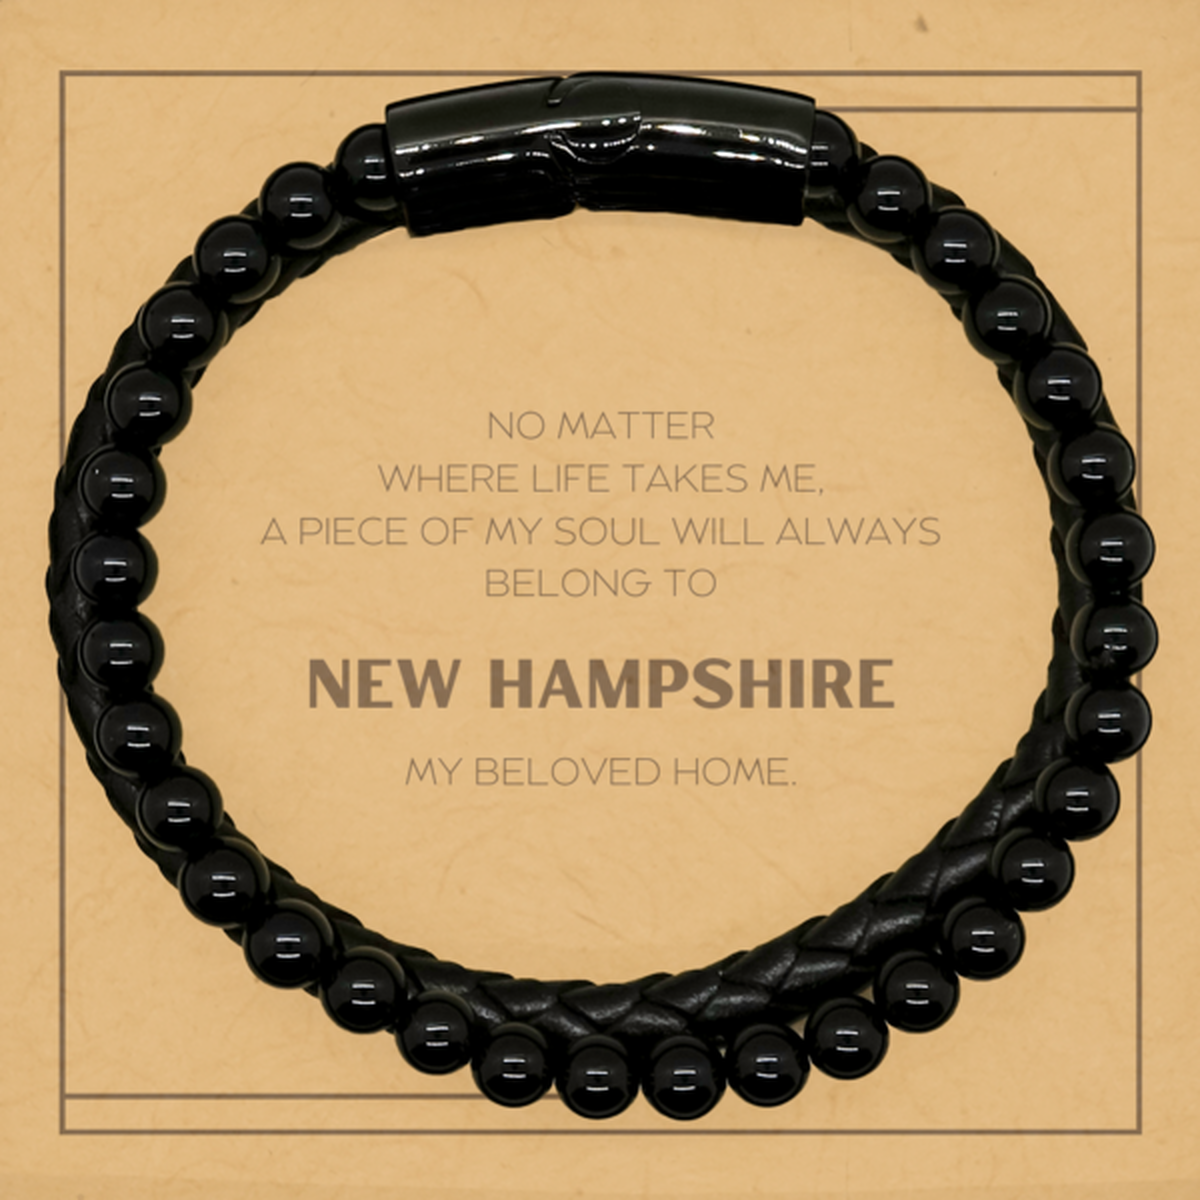 Love New Hampshire State Gifts, My soul will always belong to New Hampshire, Proud Stone Leather Bracelets, Birthday Unique Gifts For New Hampshire Men, Women, Friends